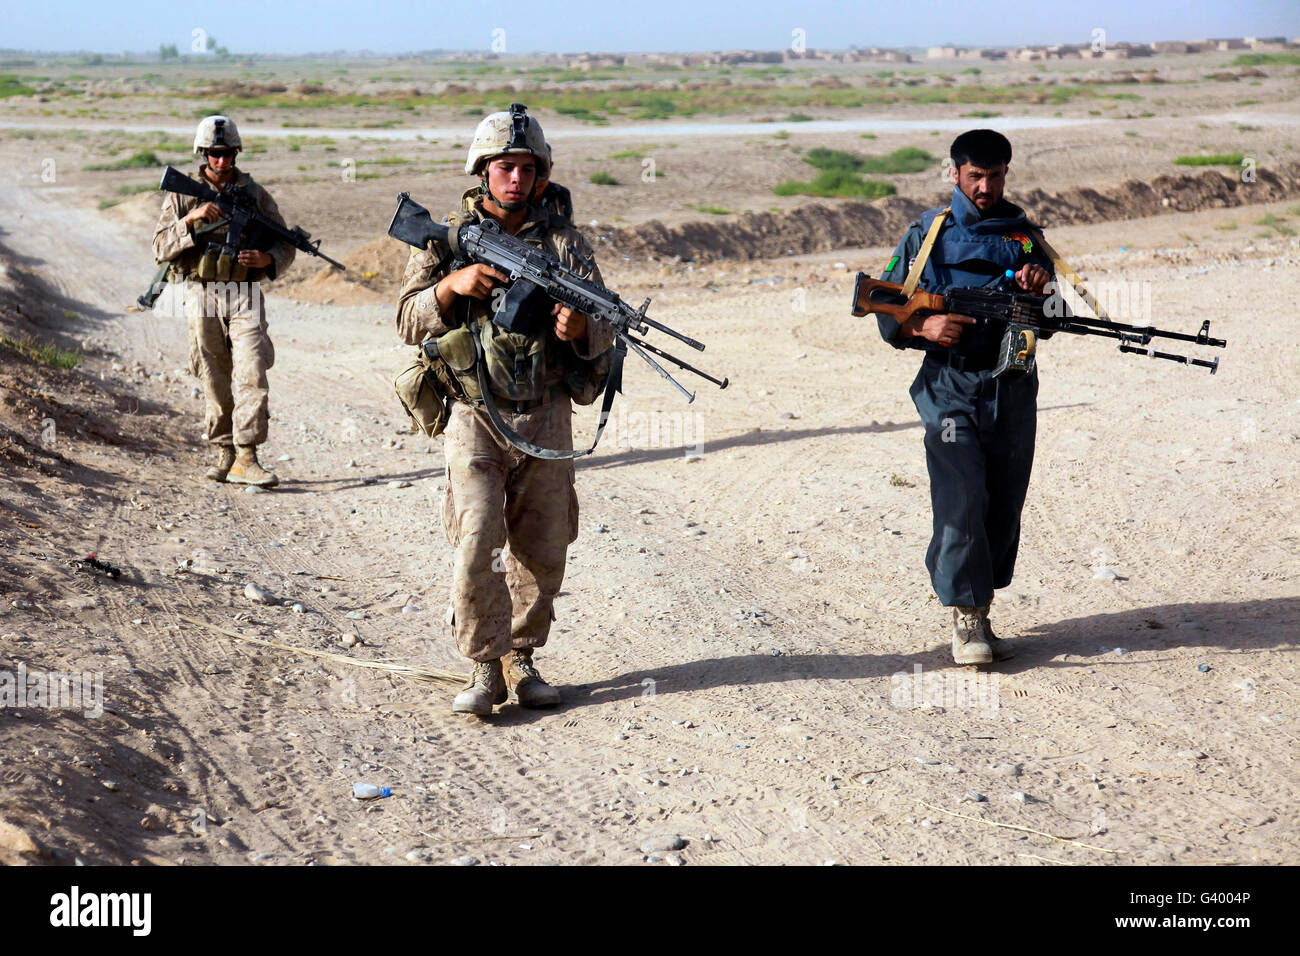 U.S. Marines and Afghan National Police officers conducting a security patrol in Afghanistan. Stock Photo